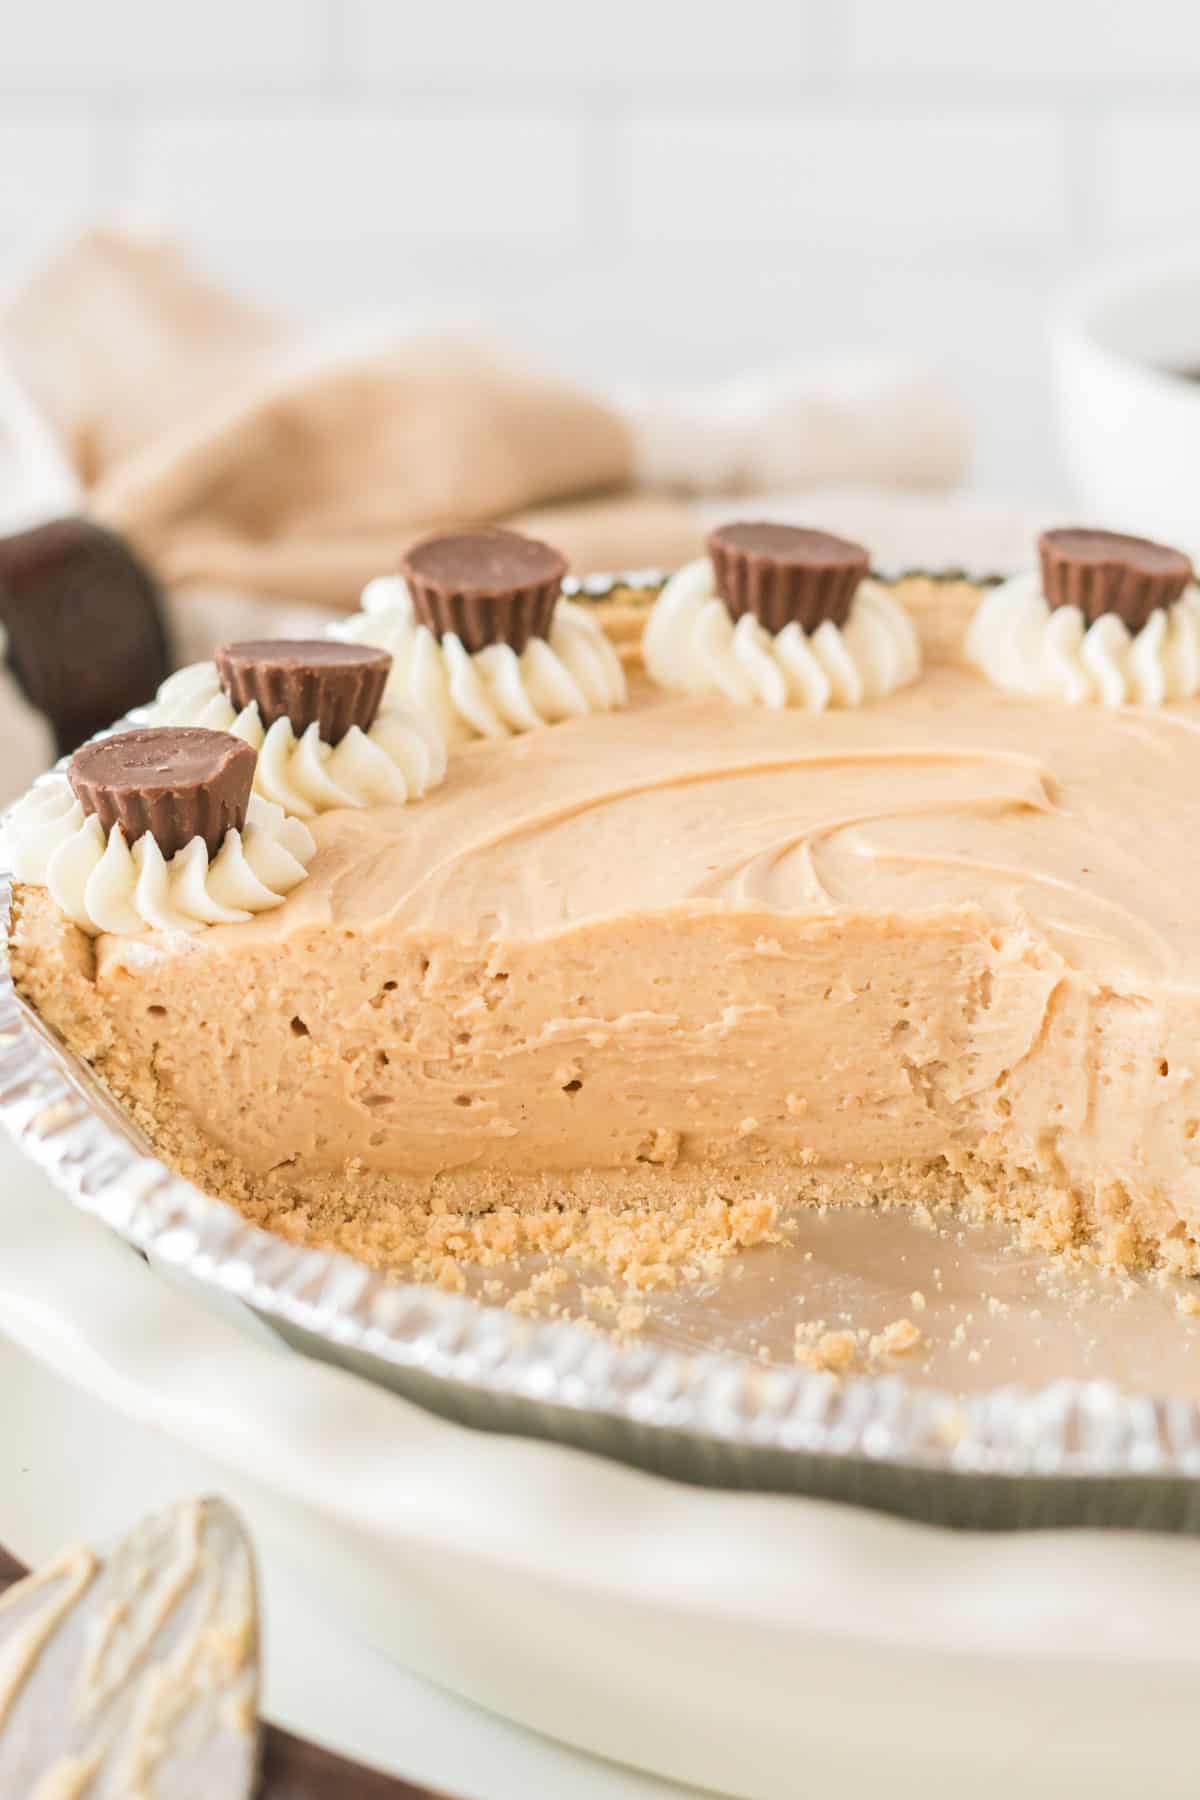 peanut butter pie from the side to show the texture